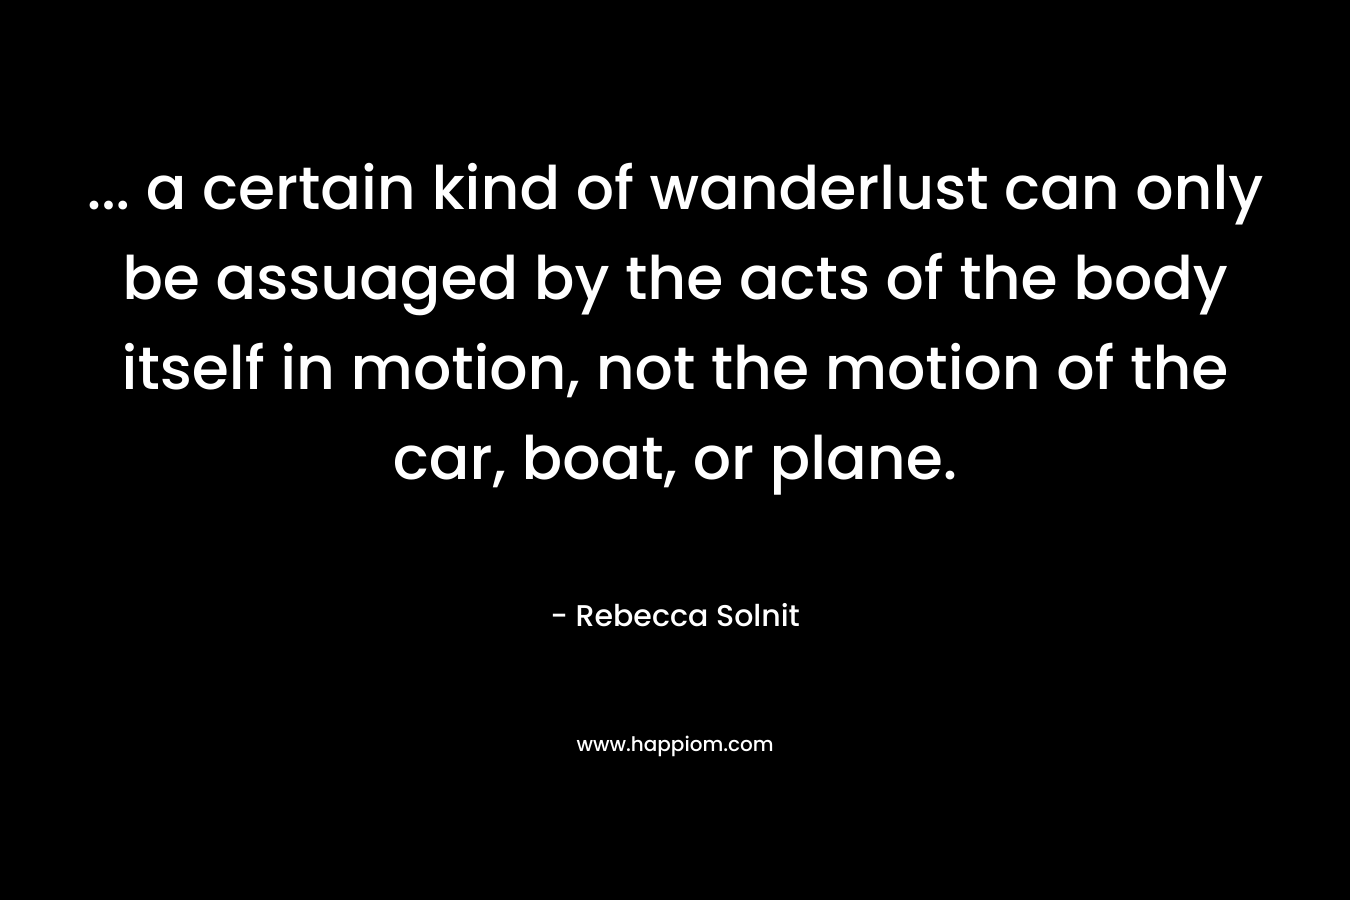 ... a certain kind of wanderlust can only be assuaged by the acts of the body itself in motion, not the motion of the car, boat, or plane.